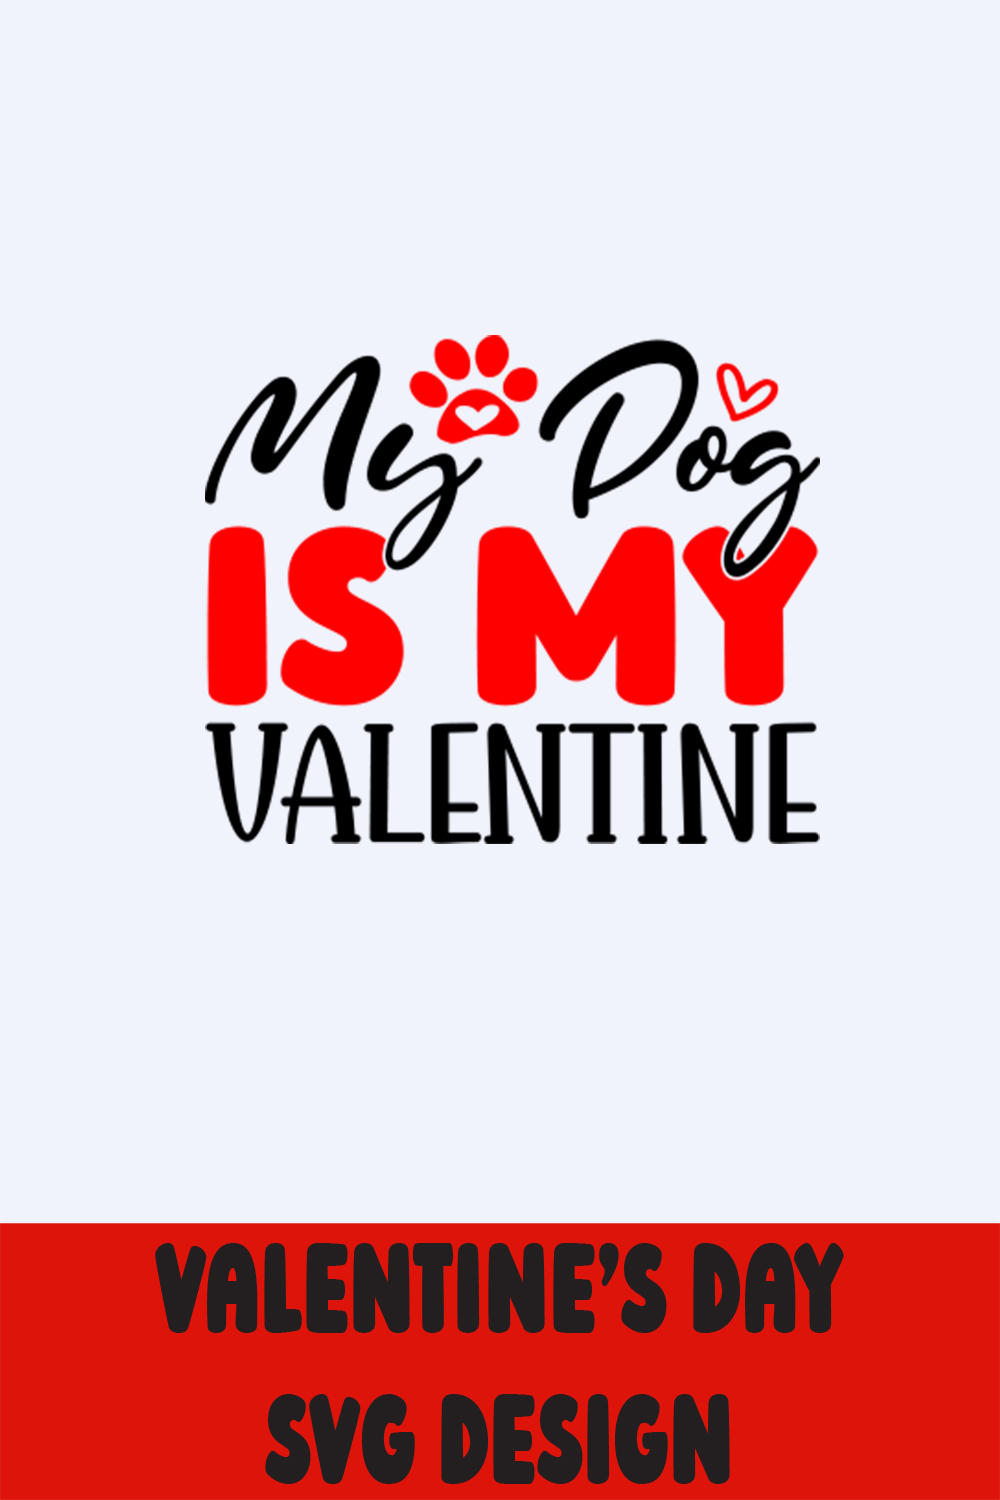 Image with colorful inscription My Dog Is My Valentine